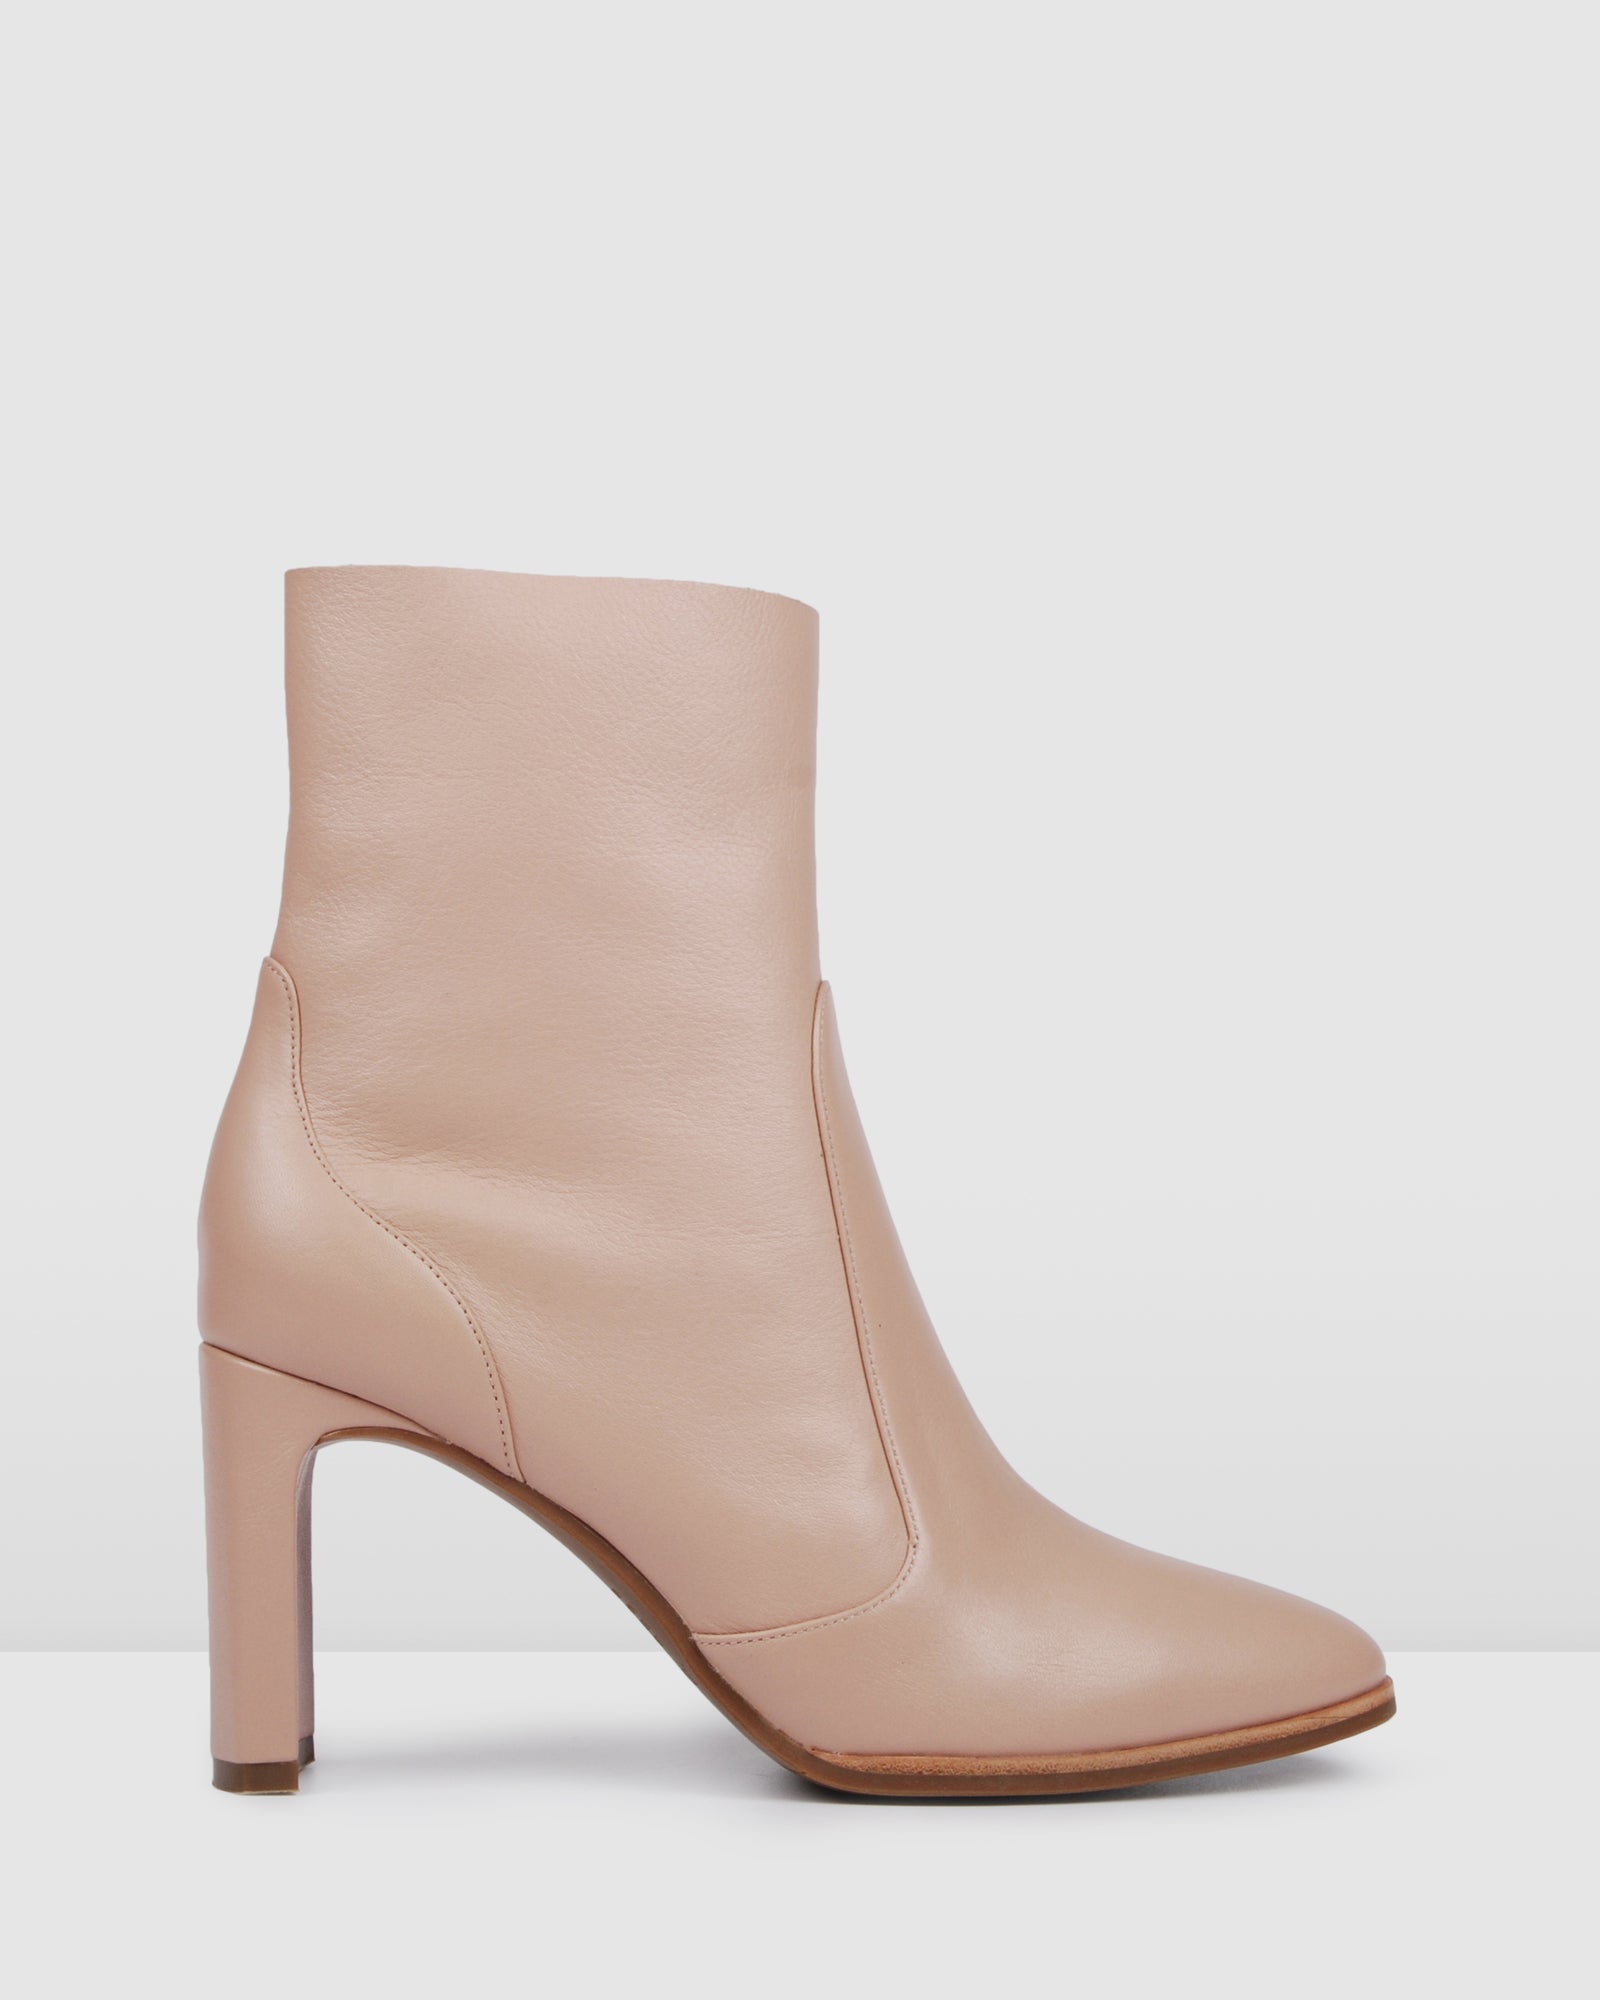 SAVANNAH HIGH ANKLE BOOTS BEIGE LEATHER 